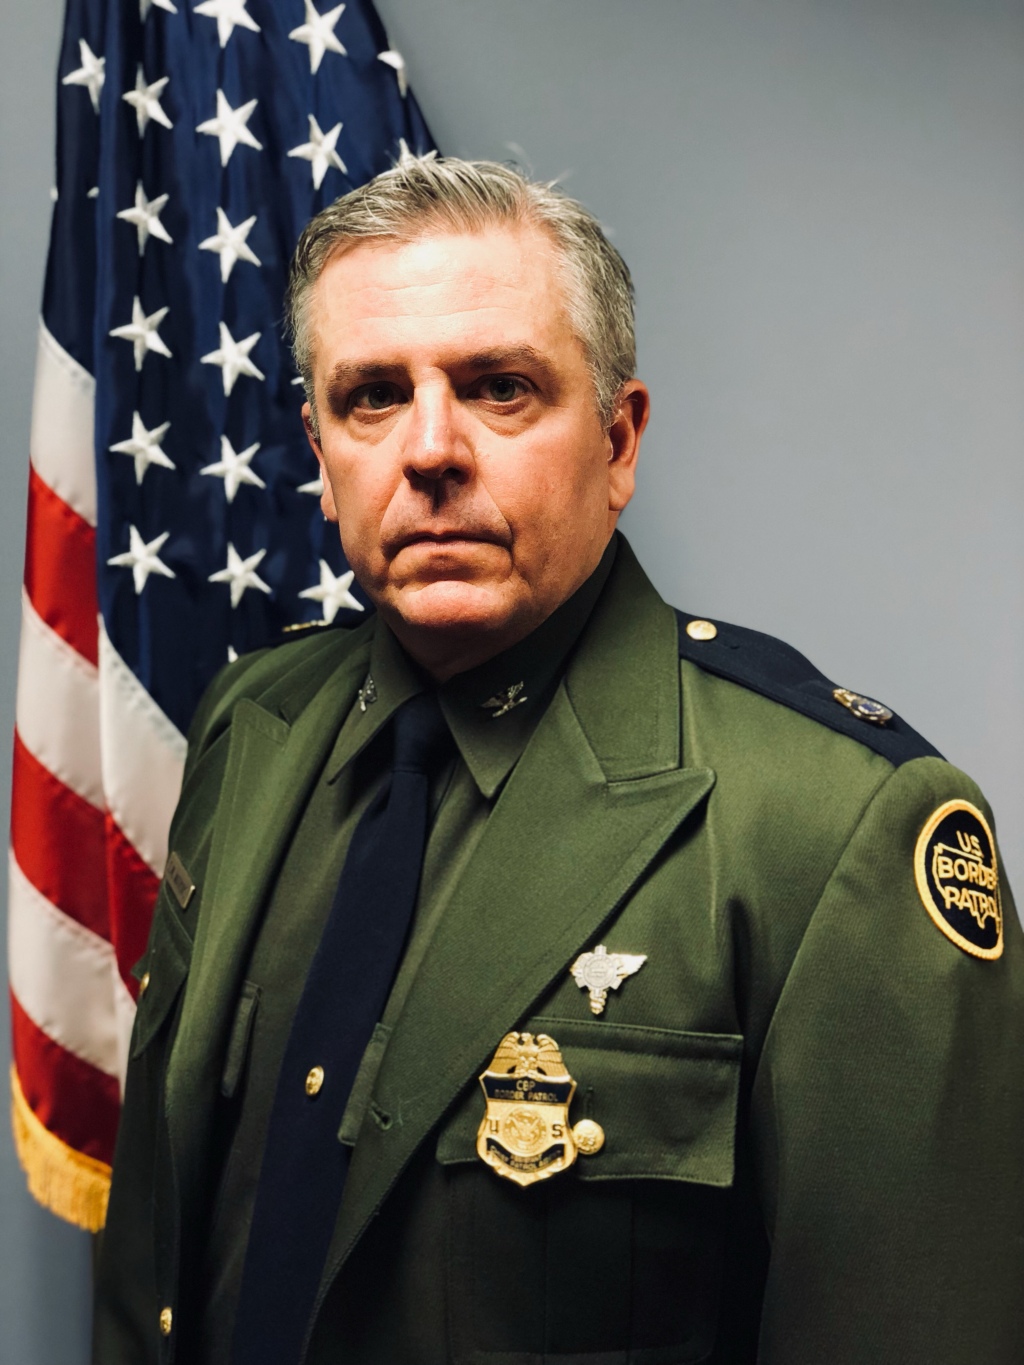 guest post: open letter to the us border patrol from a recently retired assistant chief